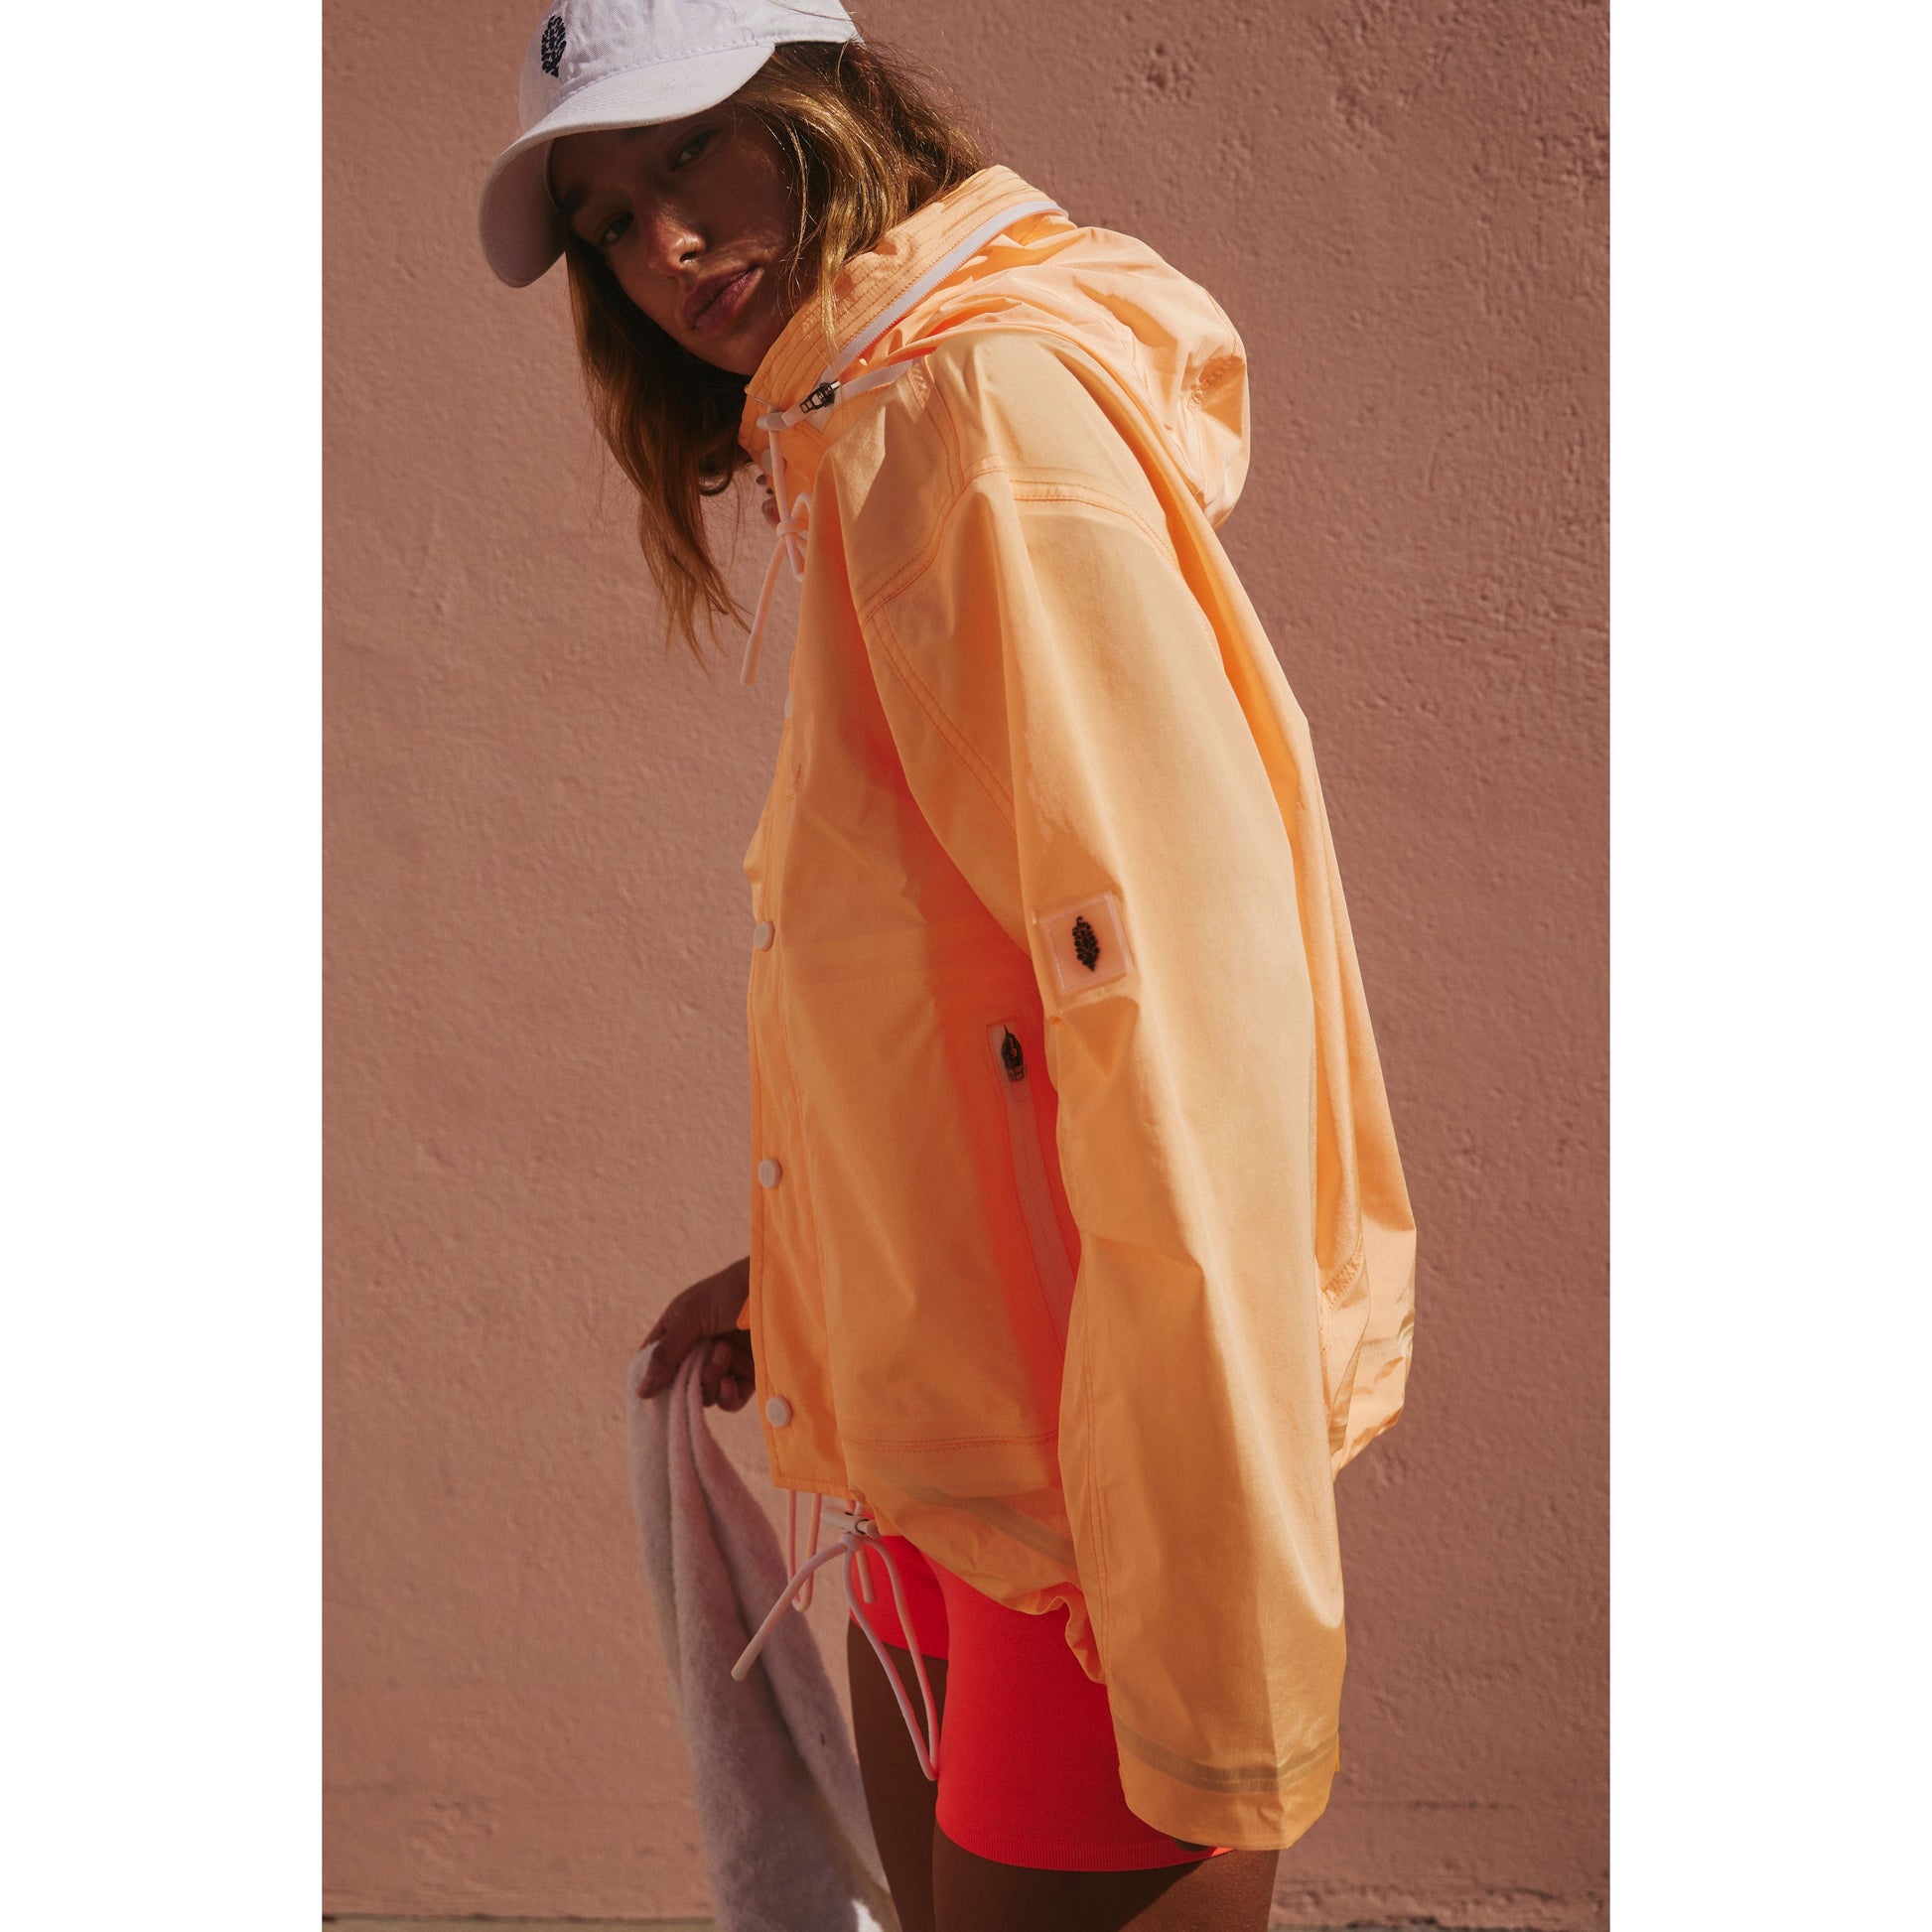 A woman models a vibrant orange Rain & Shine Jacket by Morning Sun and red shorts, paired with a white cap, against a pink wall. Brand Name: Free People Movement